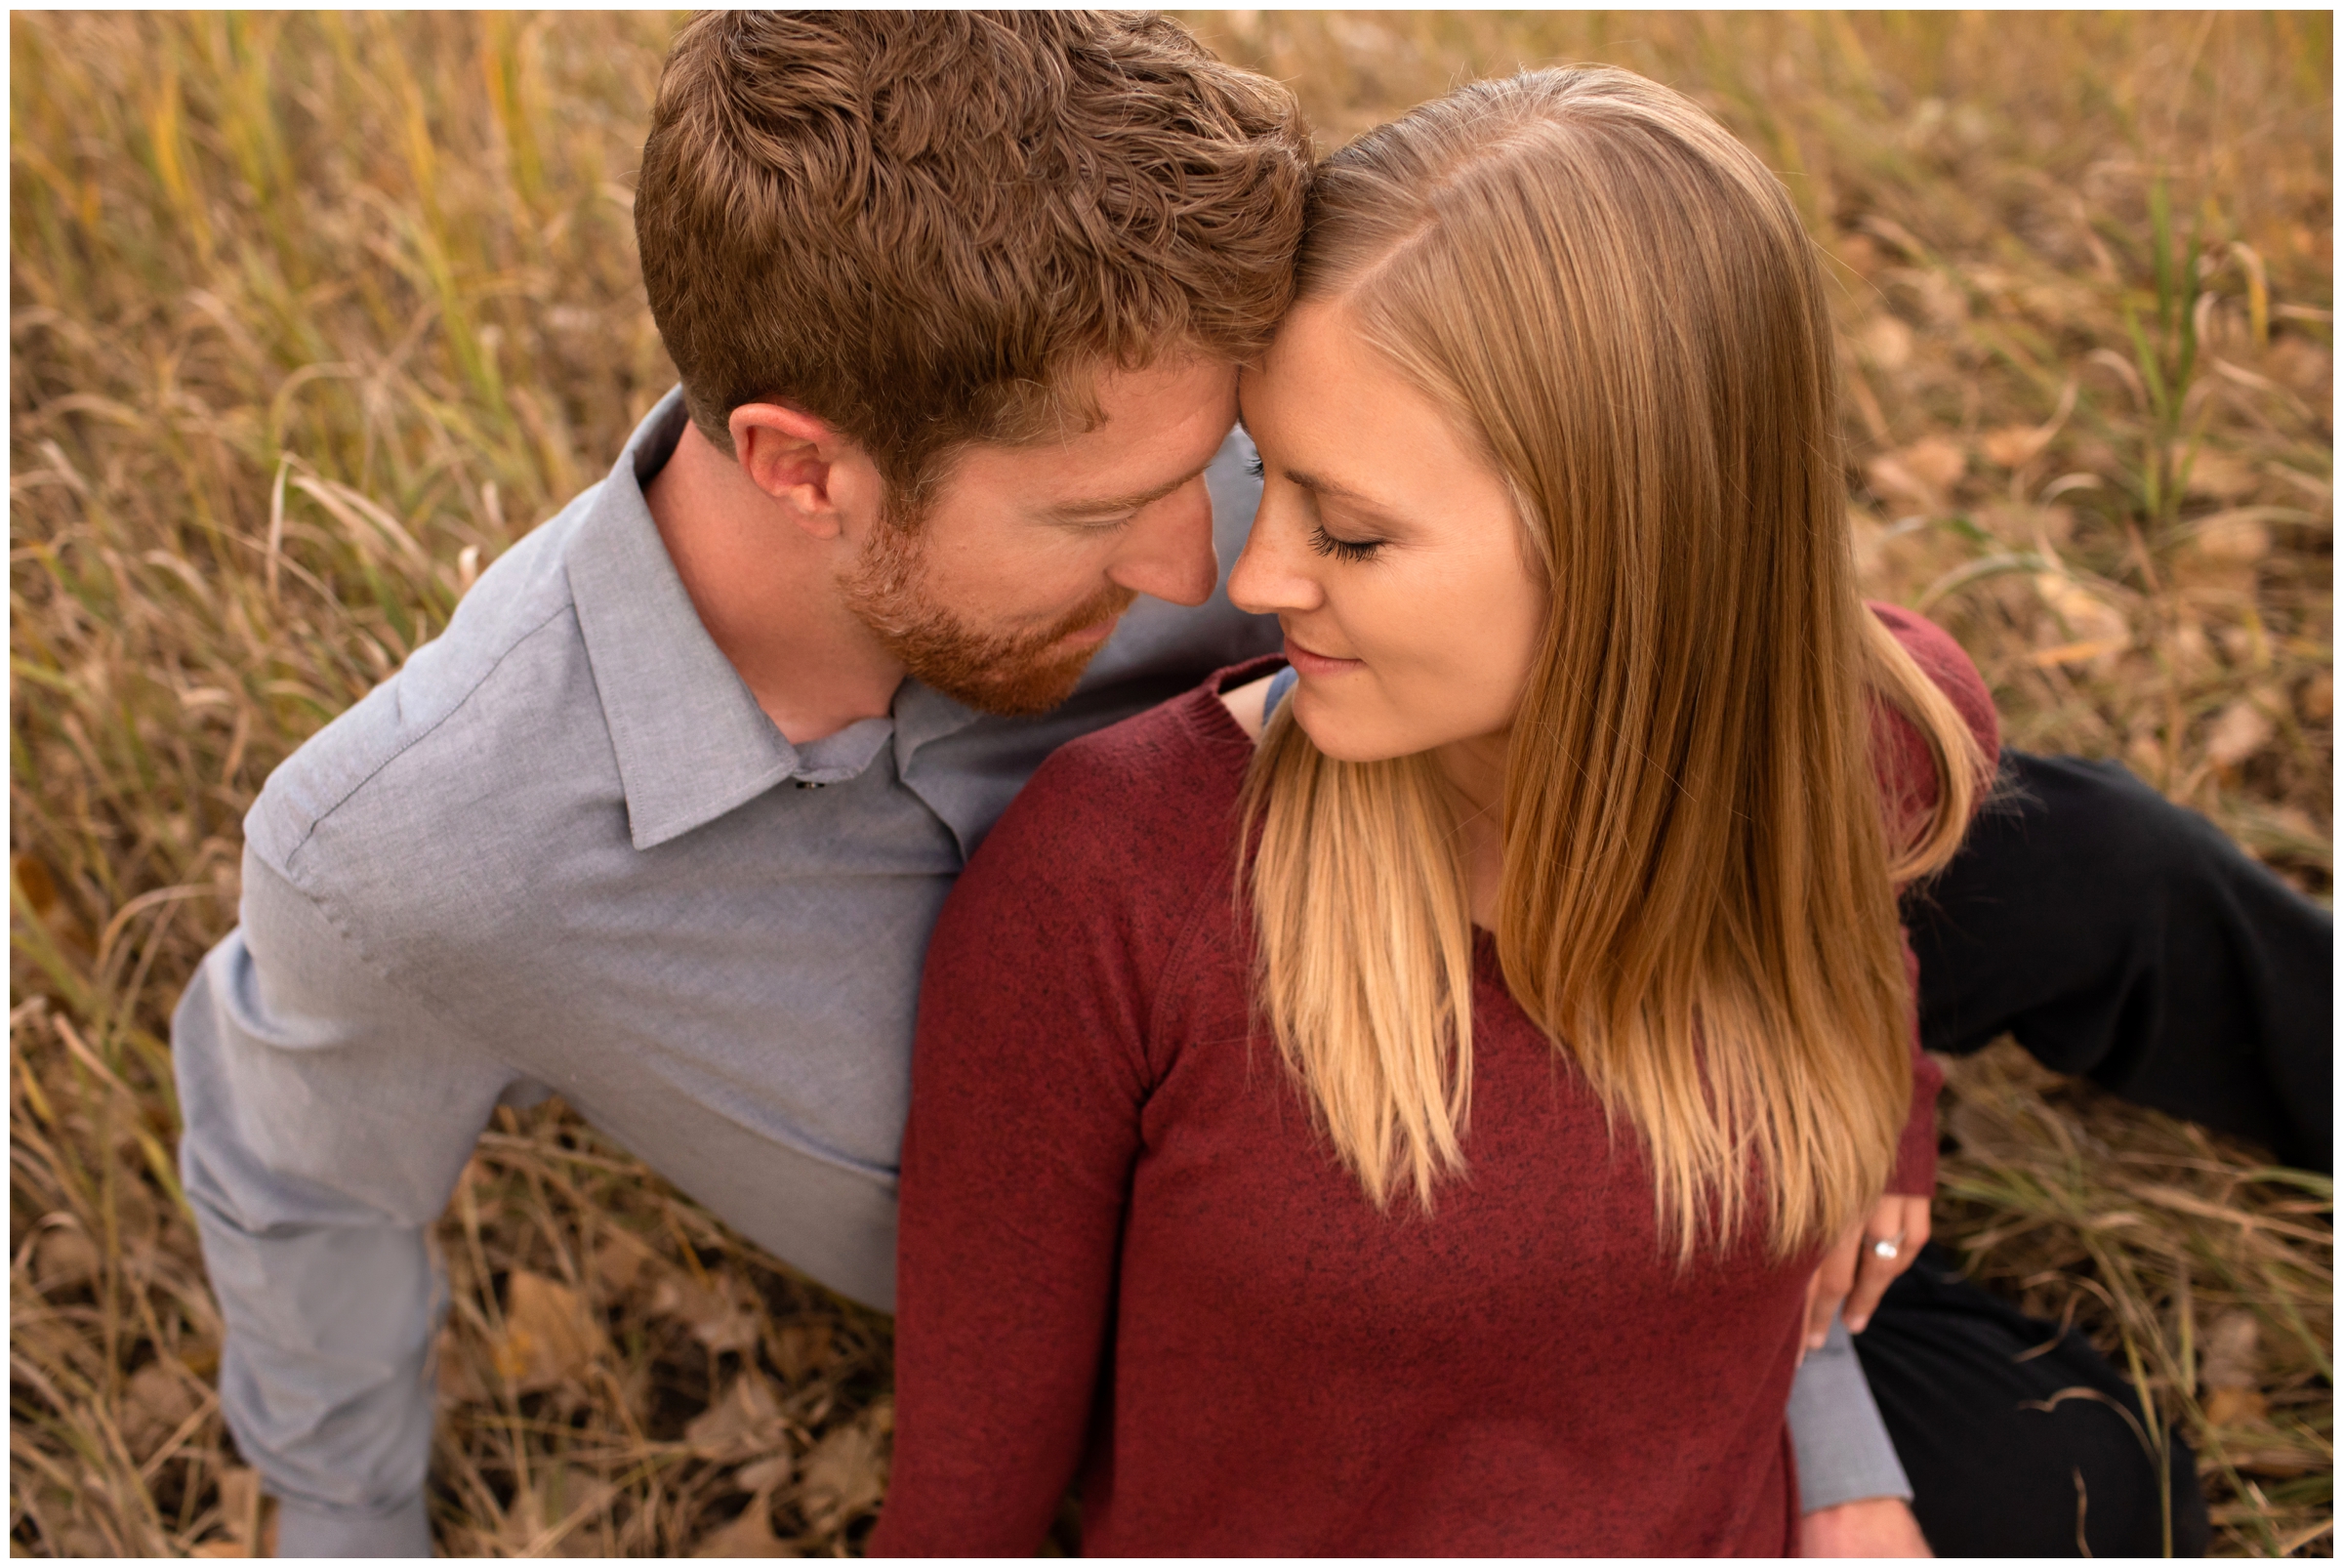 fall Fort Collins engagement photography at River Bend Ponds by Colorado photographer Plum Pretty Photography